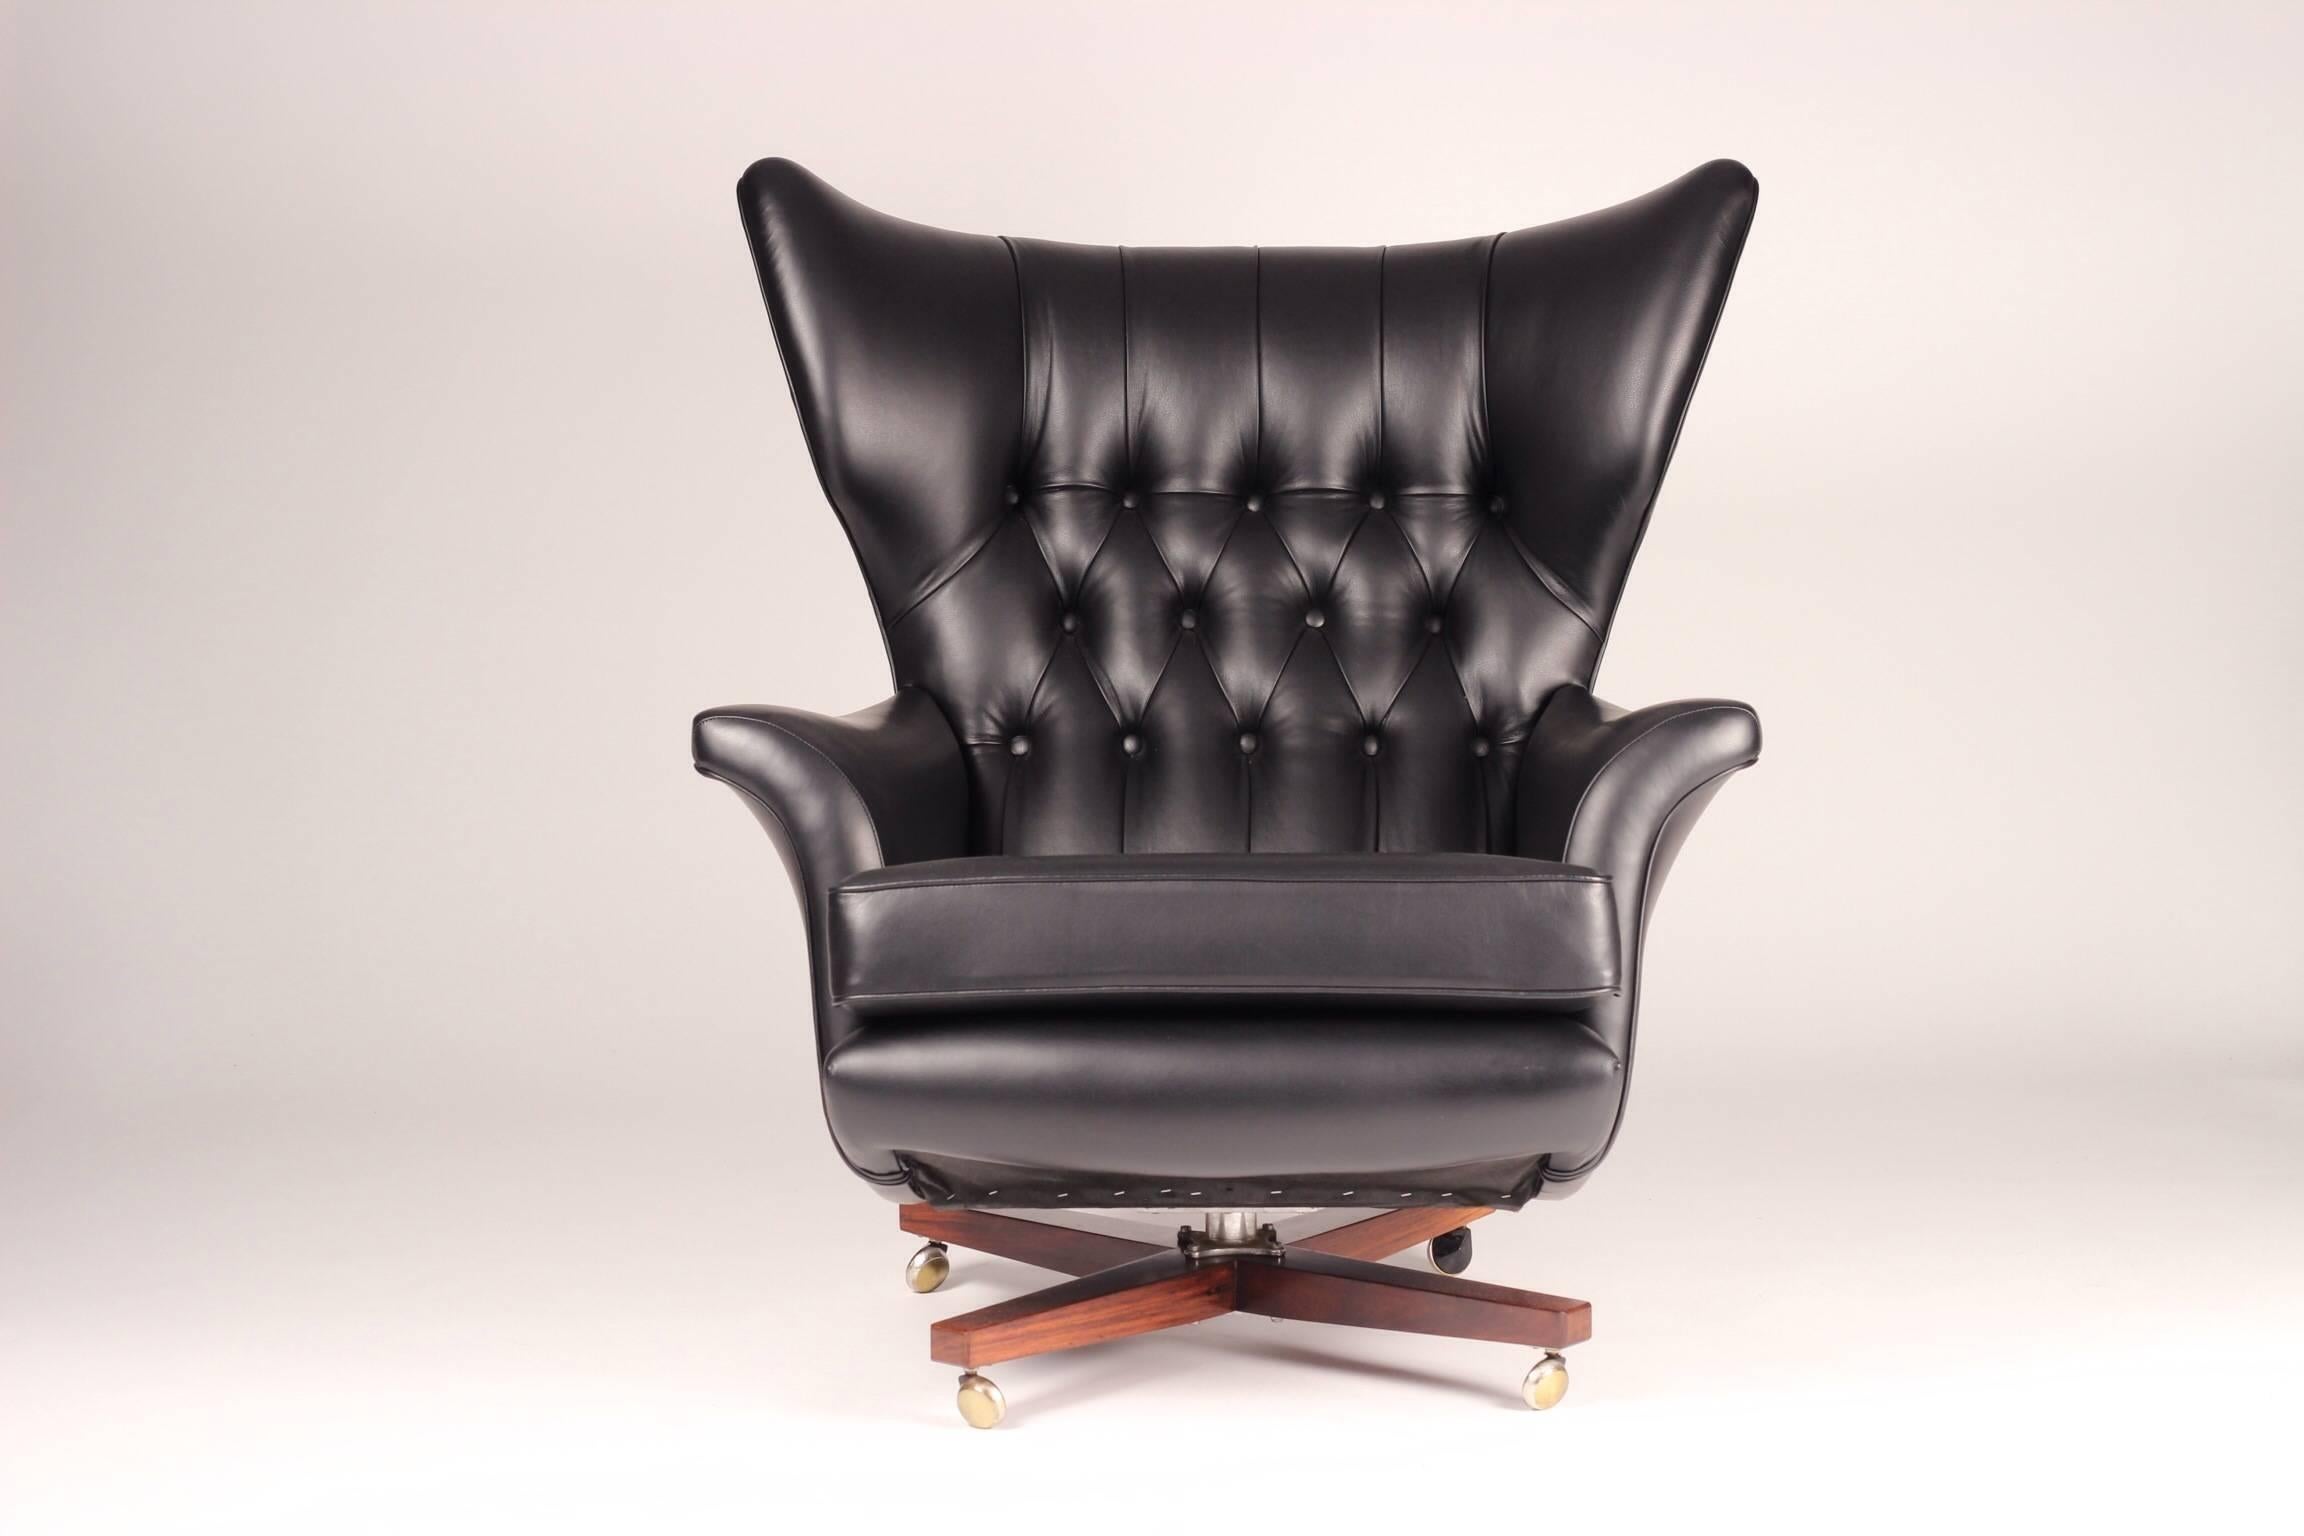 Once described as 'the worlds most comfortable chair' this recently reupholstered piece in fine Italian black leather will surely bring out your inner Bond Villain. Appearing in original black the model 62 was used in The Bond movie 'You only live